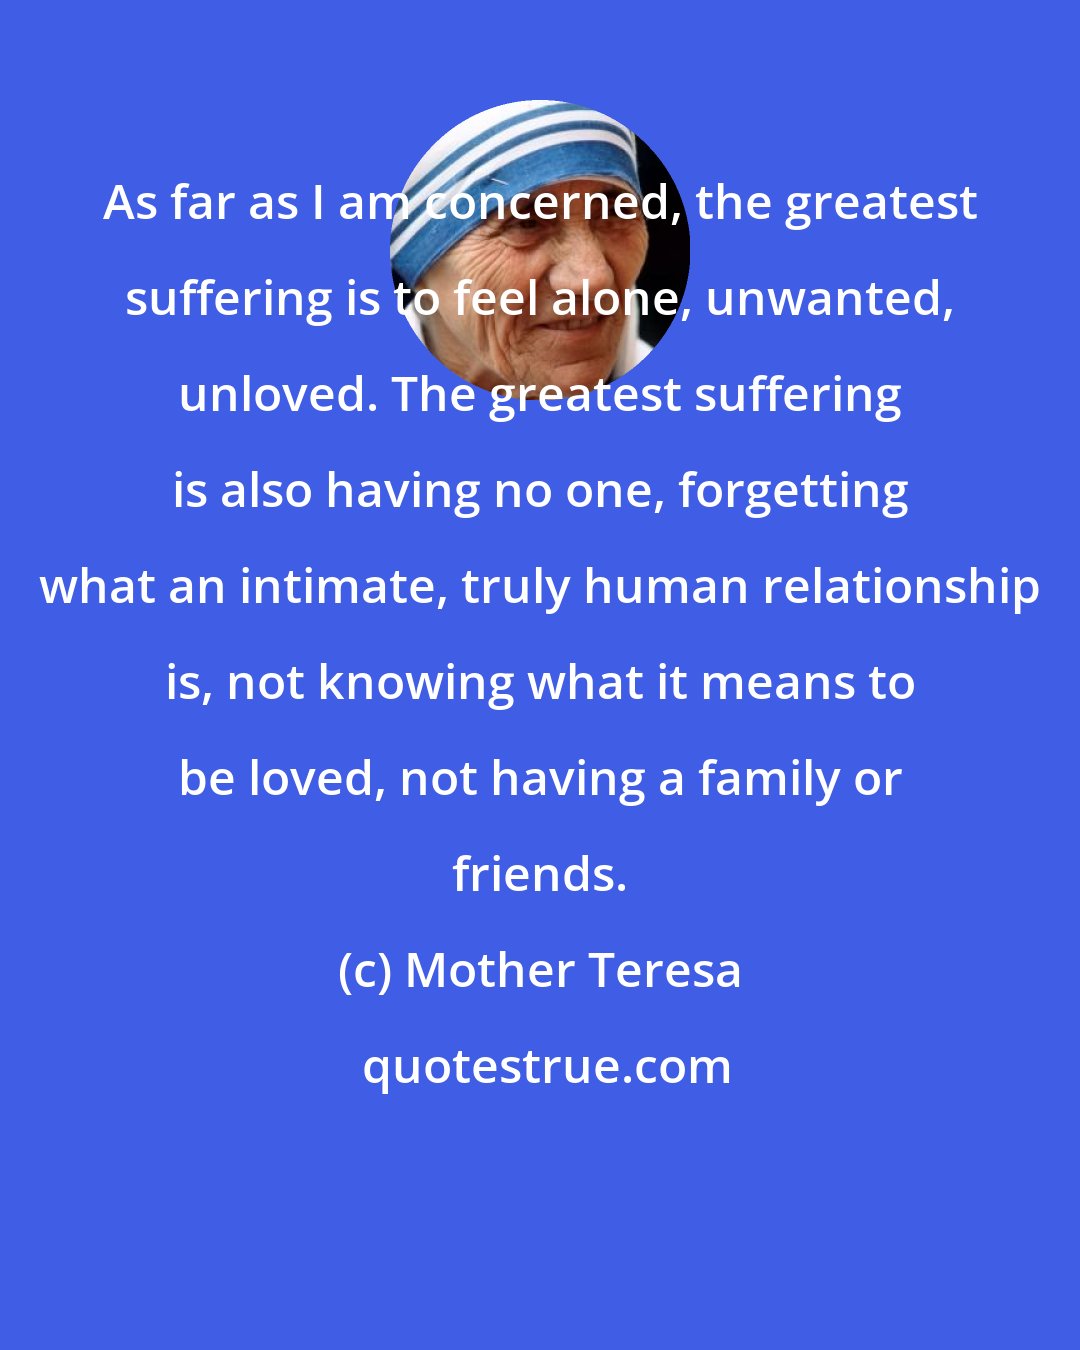 Mother Teresa: As far as I am concerned, the greatest suffering is to feel alone, unwanted, unloved. The greatest suffering is also having no one, forgetting what an intimate, truly human relationship is, not knowing what it means to be loved, not having a family or friends.